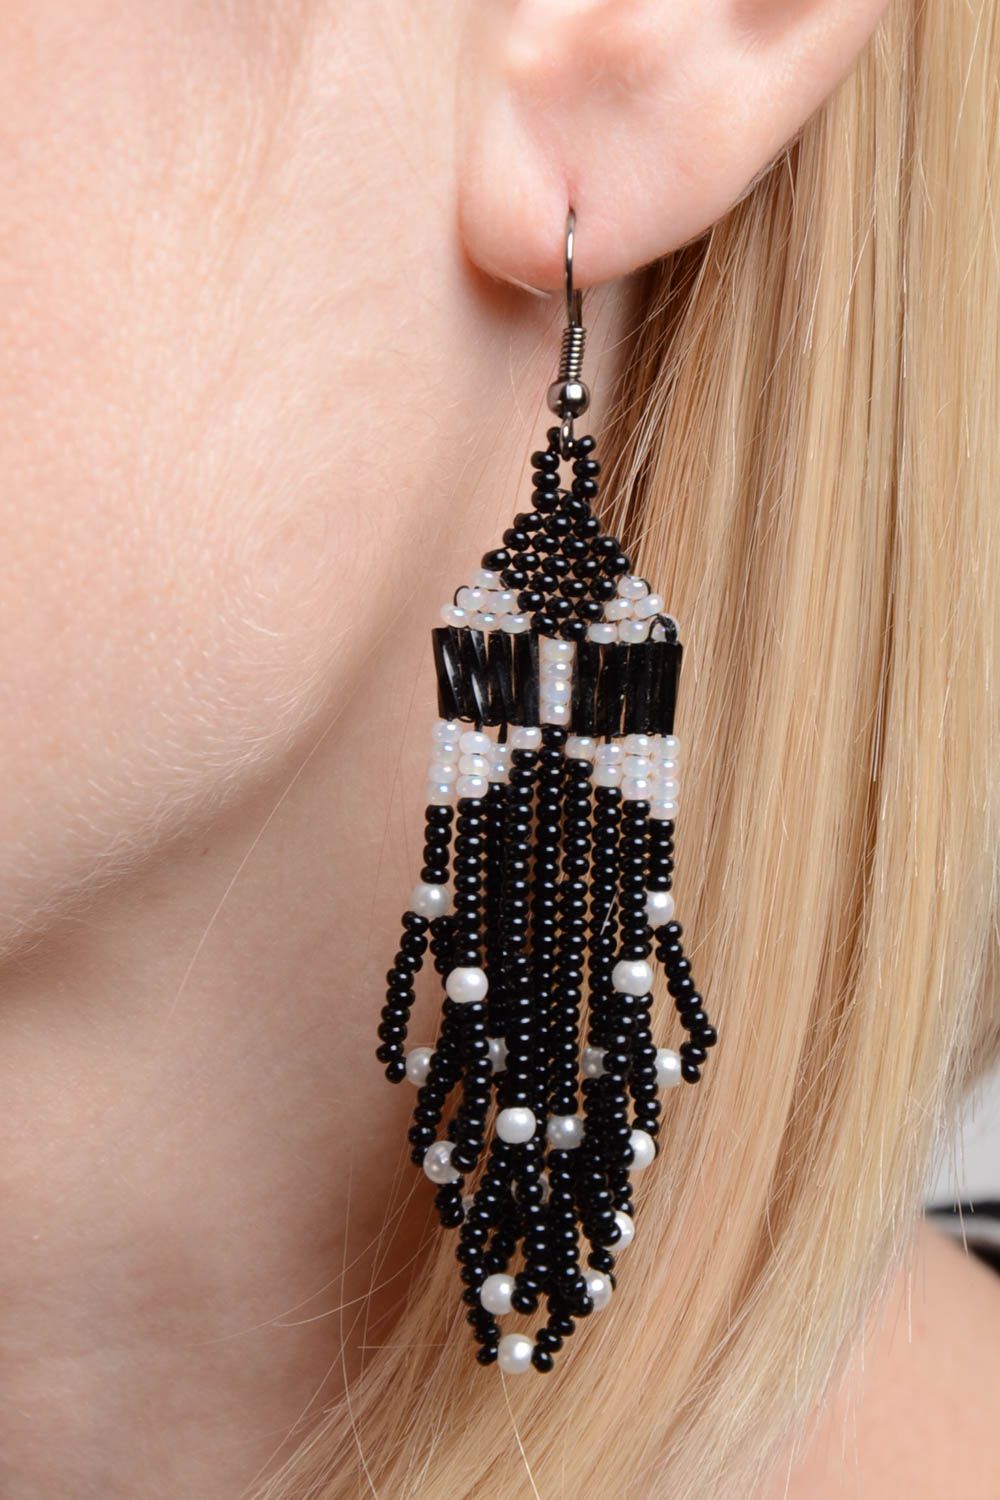 Handmade beaded earrings black and white accessory designer earrings with charms photo 2